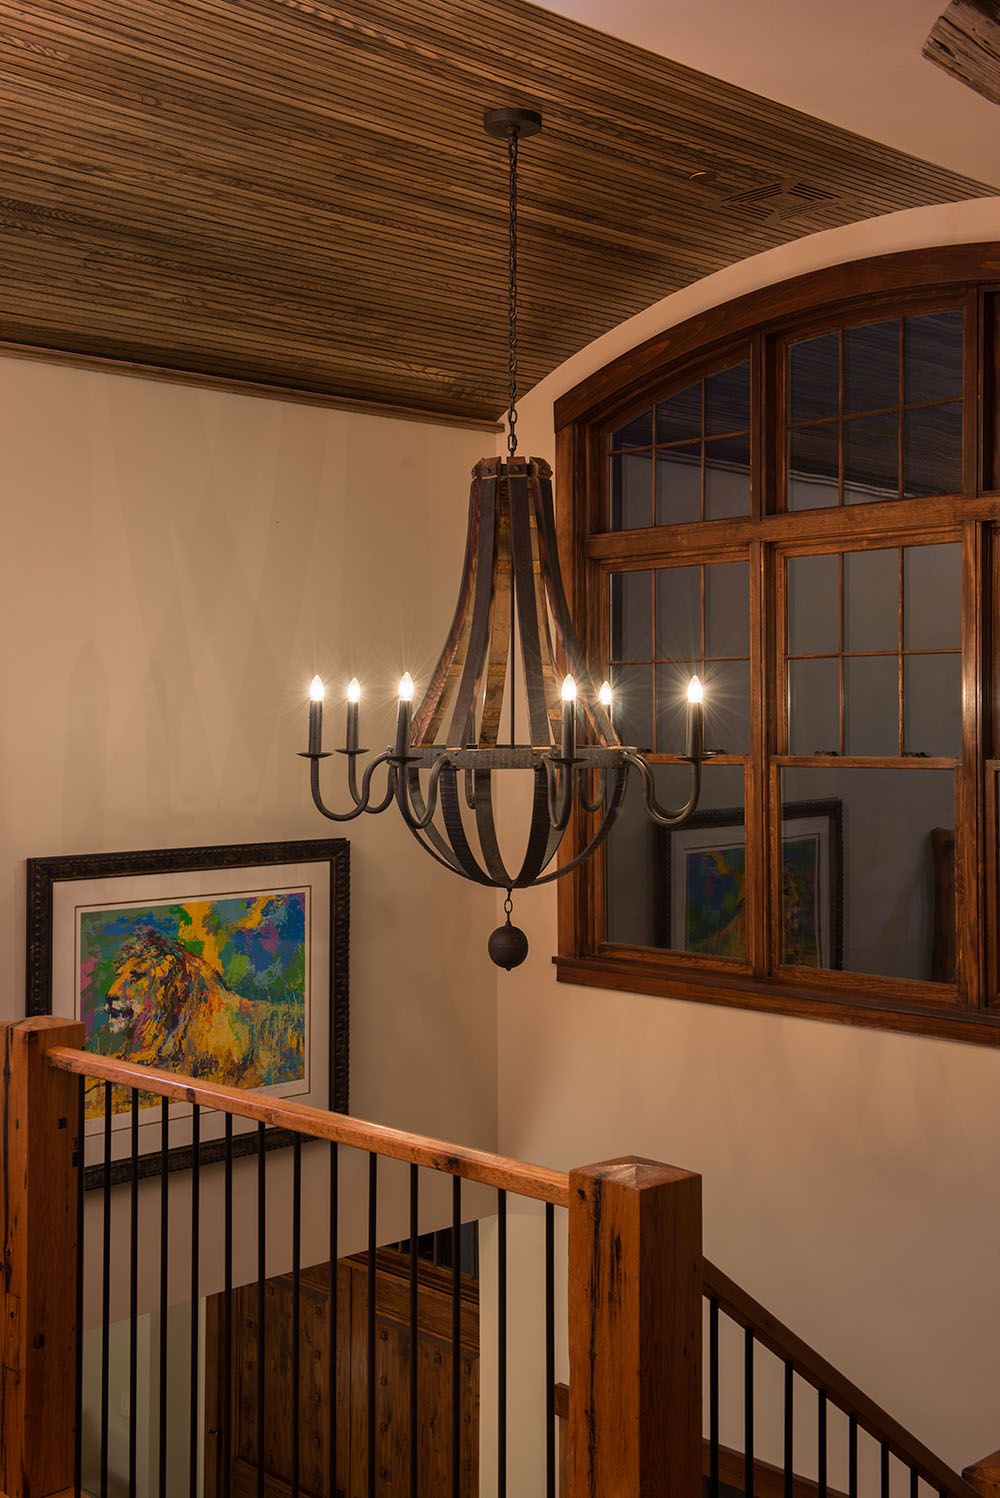 A 48"W Barrel Stave 8 LT Chandelier hanging above a wooden staircase.